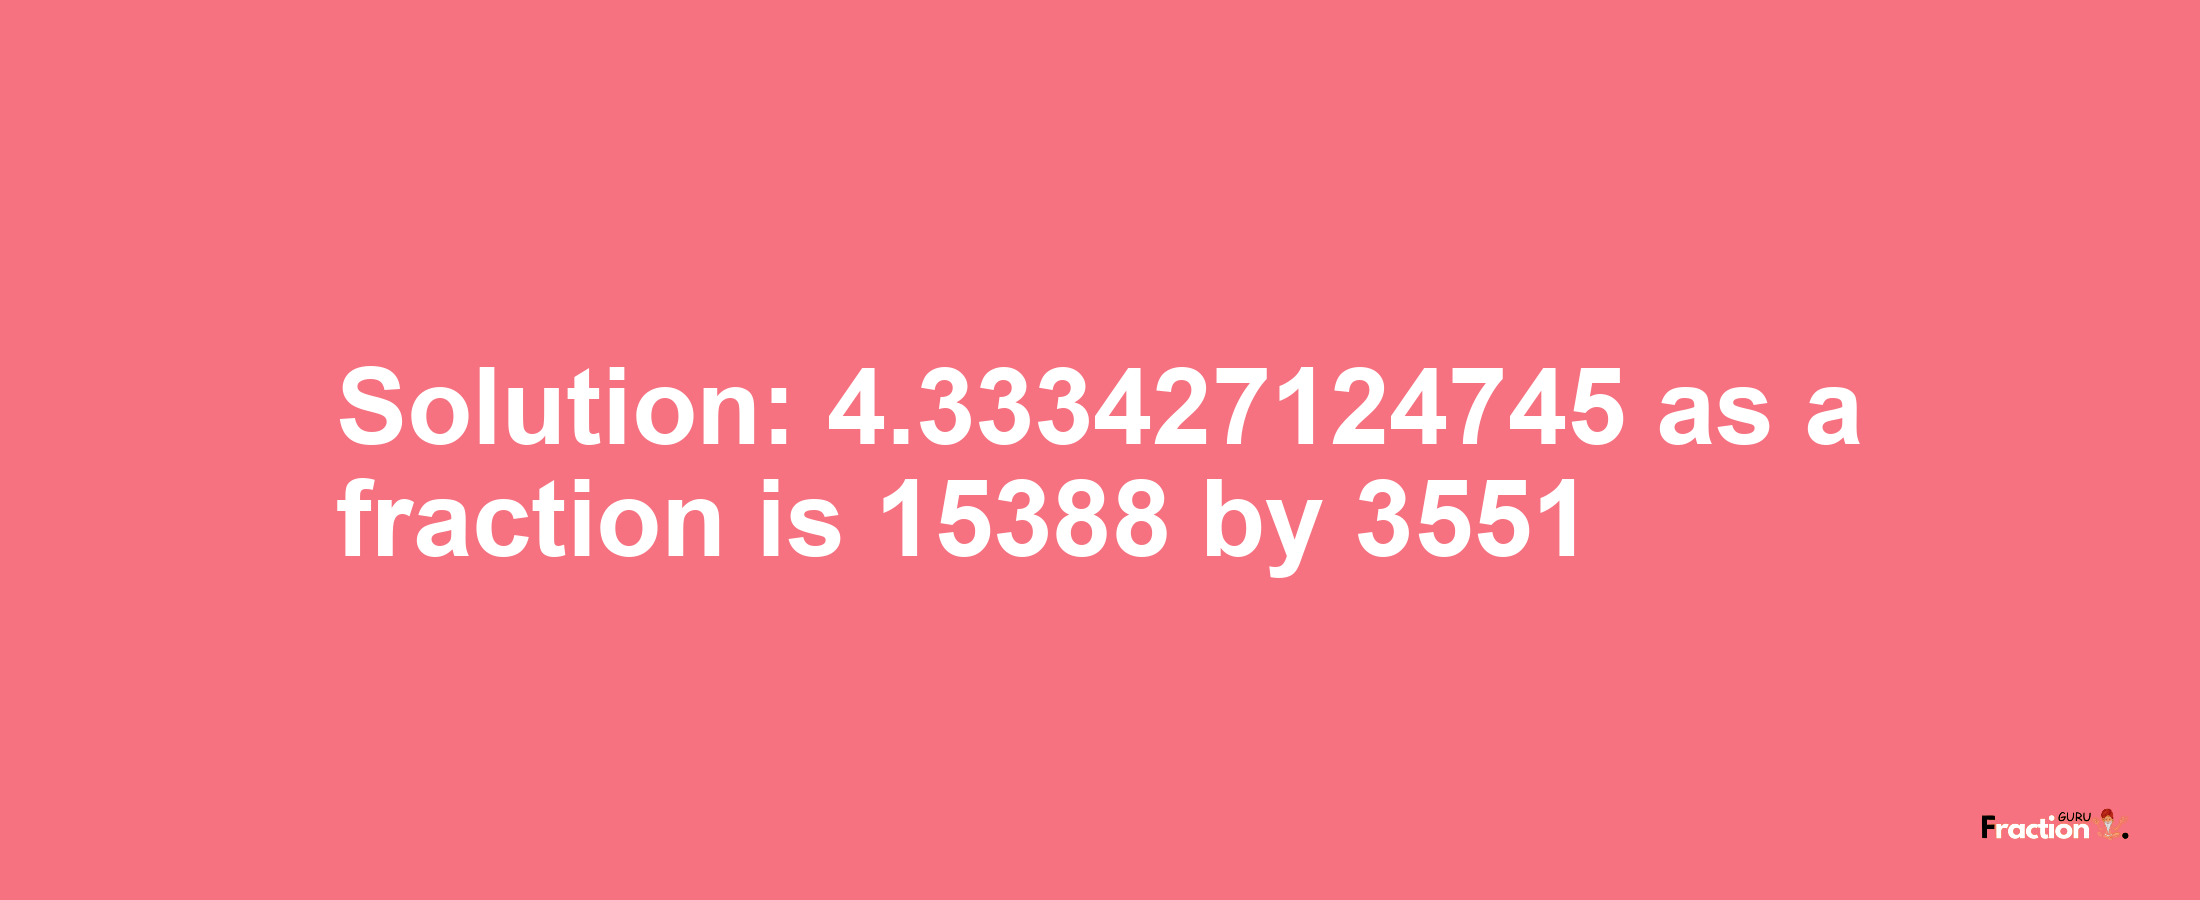 Solution:4.333427124745 as a fraction is 15388/3551